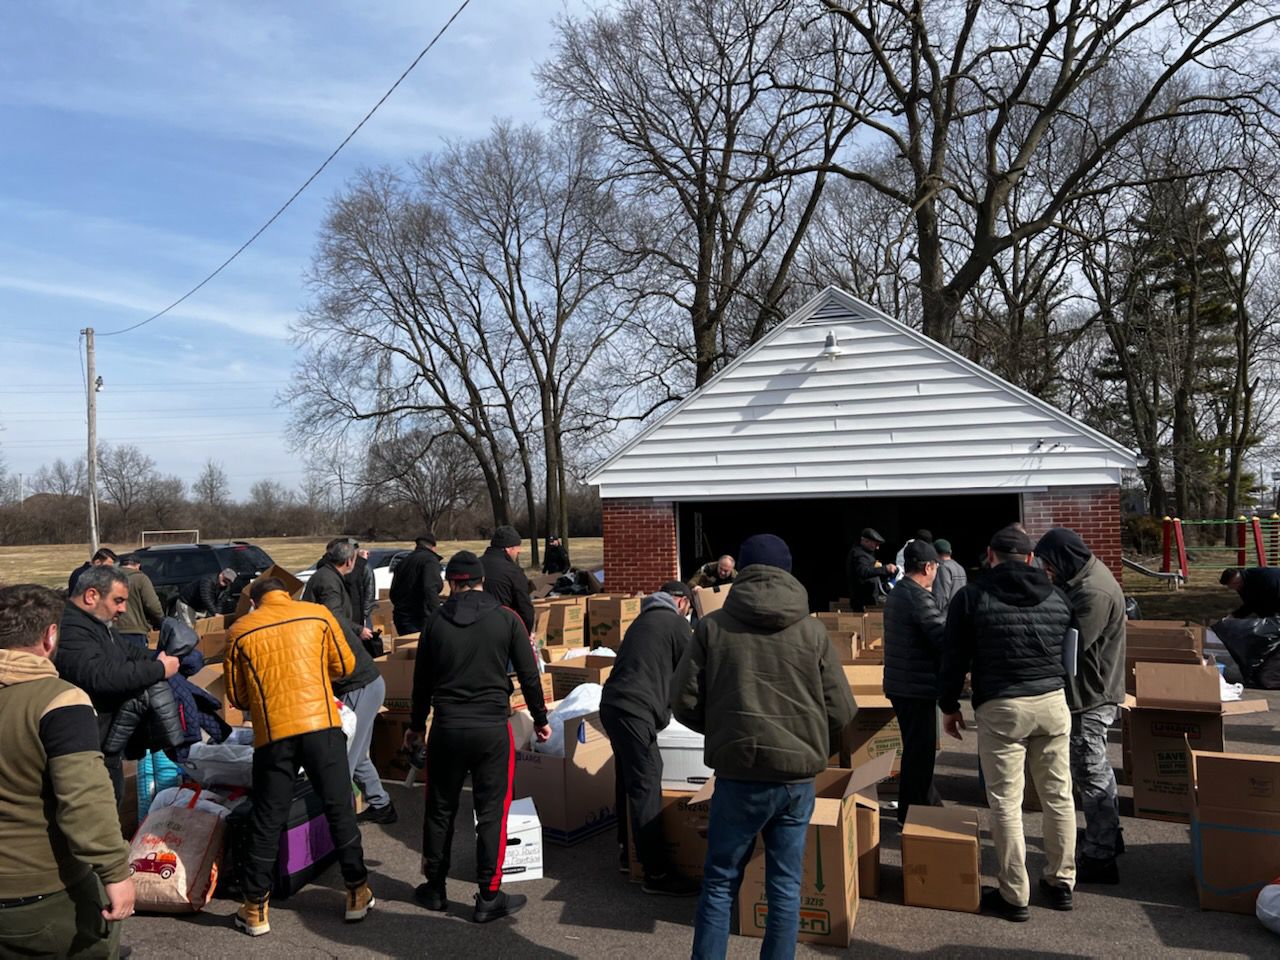 A team of more than 40 volunteers from a Dayton mosque organized donations and packed trucks with supplies headed to Turkey and Syria. (Photo courtesy of Osman Gazi Masjid)